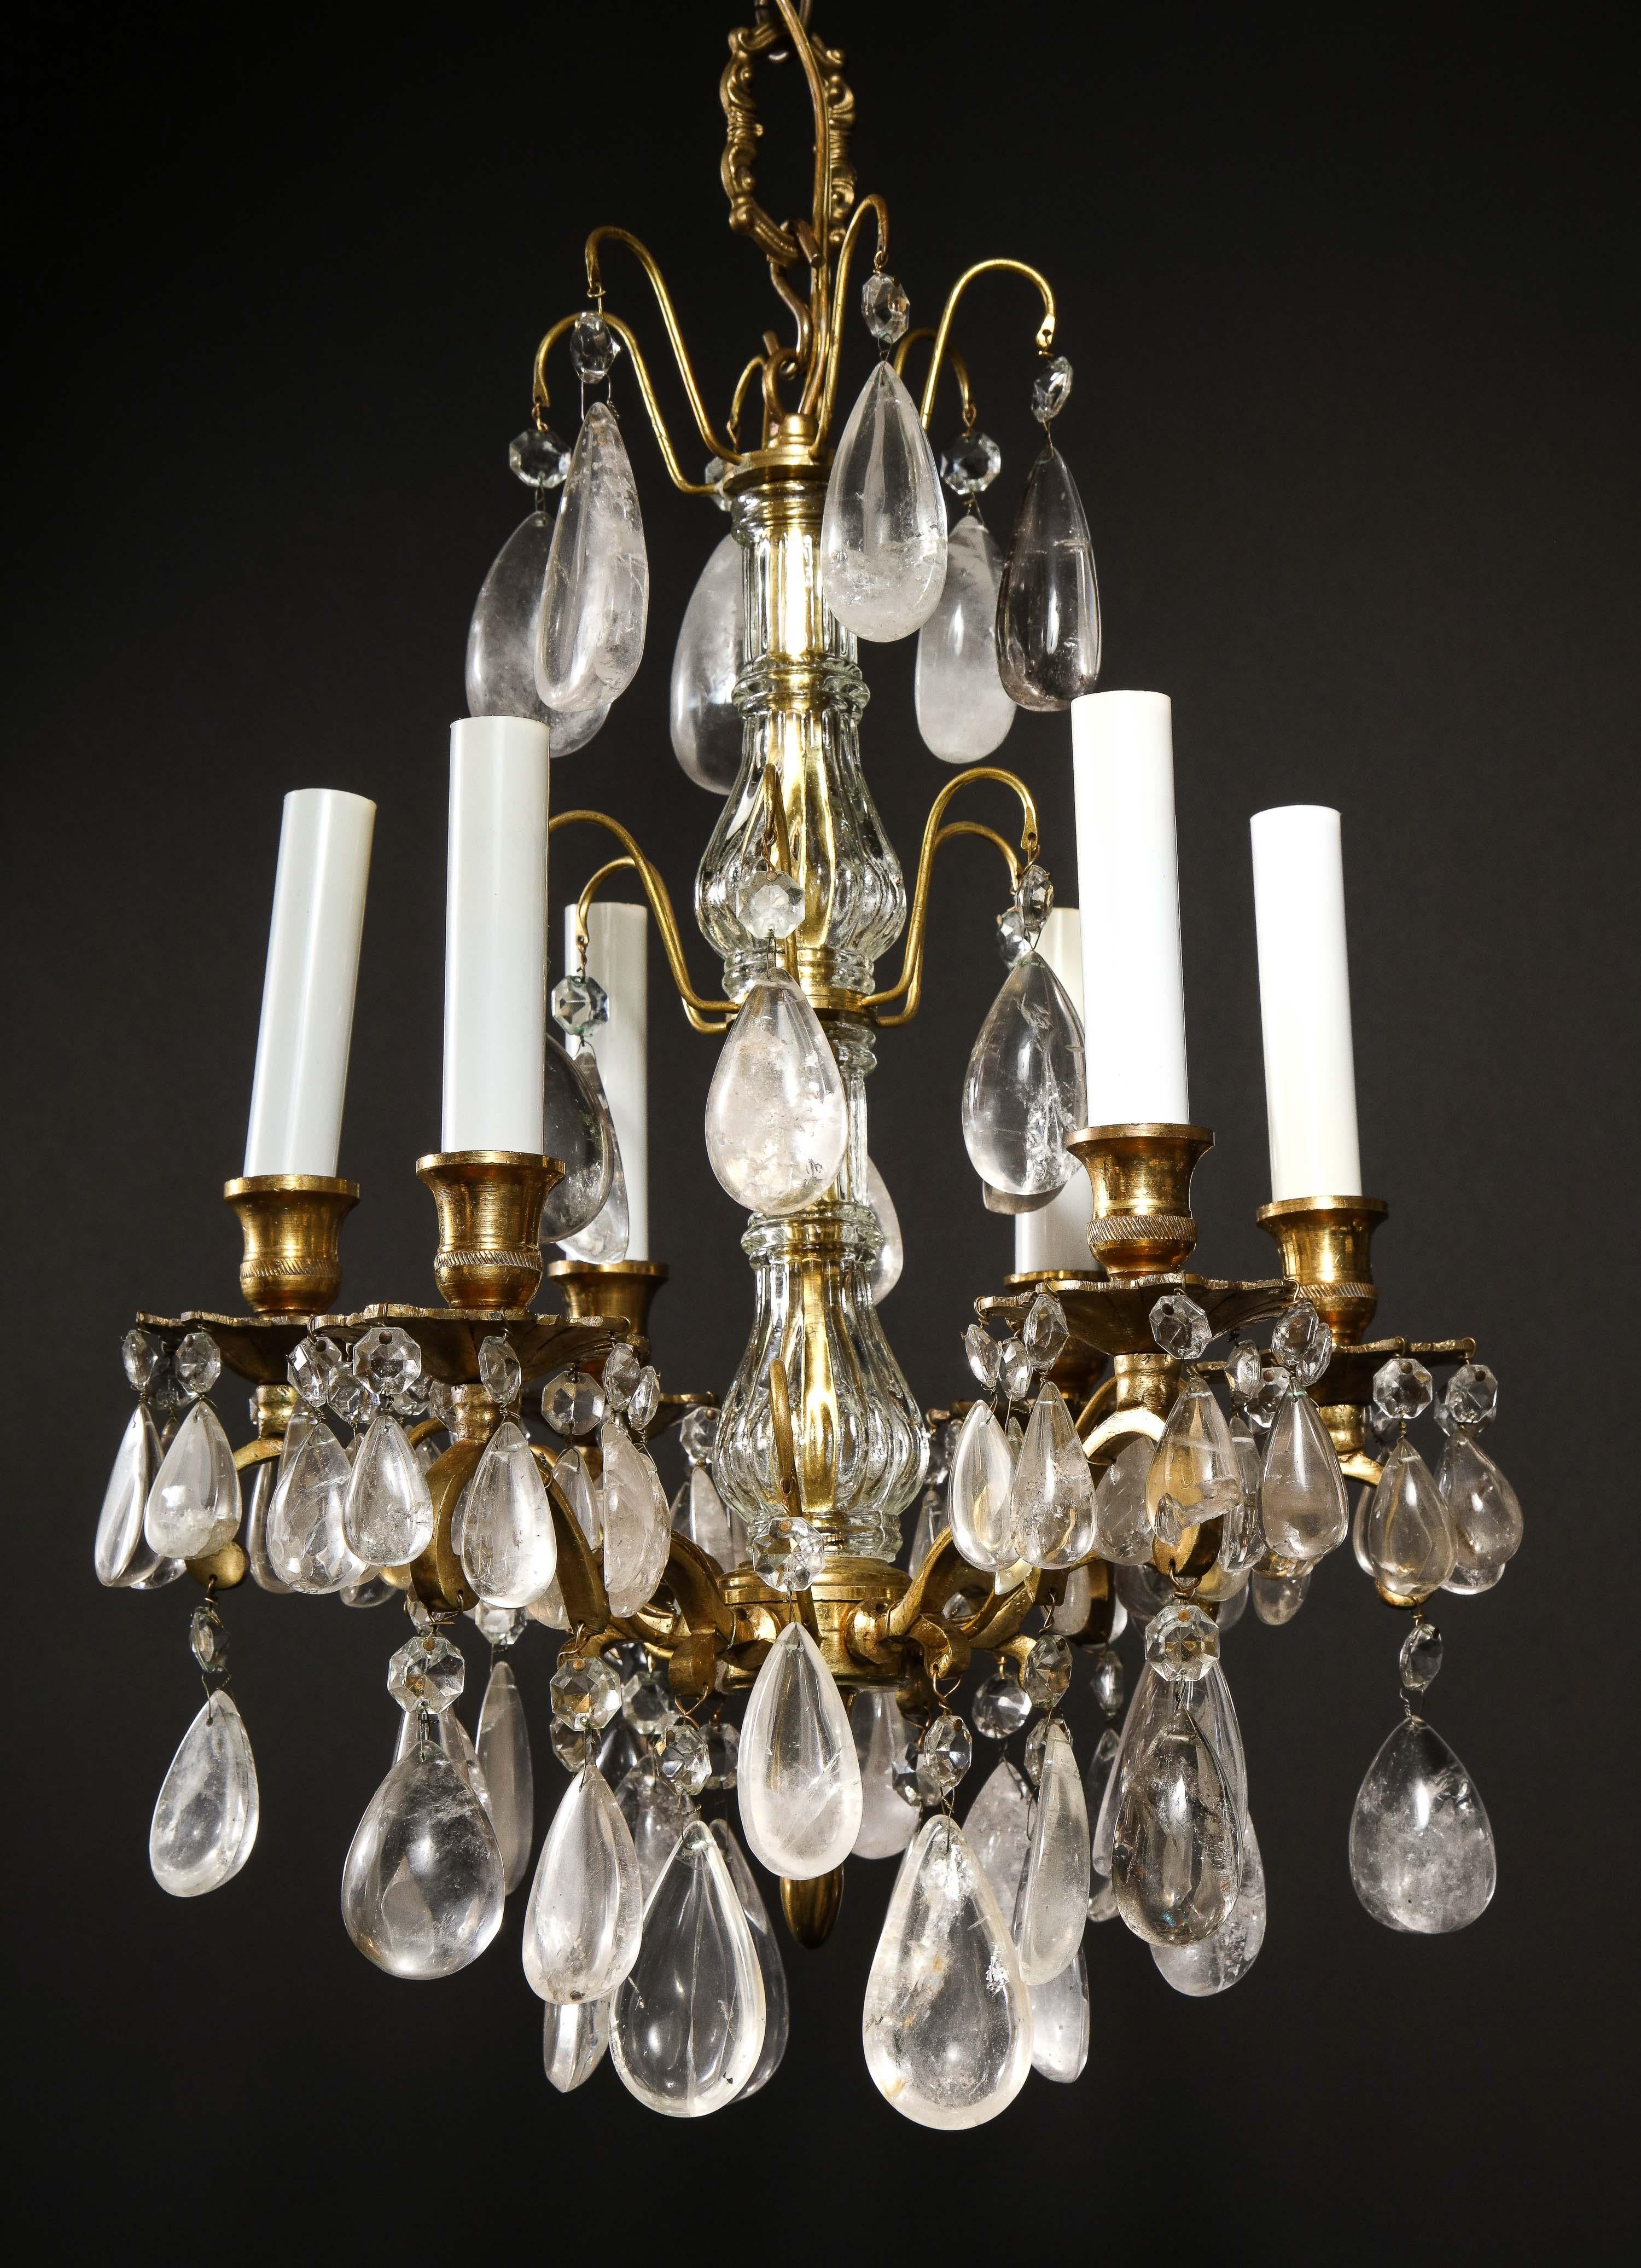 Bronze Pair of Fine Continental Louis XVI Style Rock Crystal Chandeliers